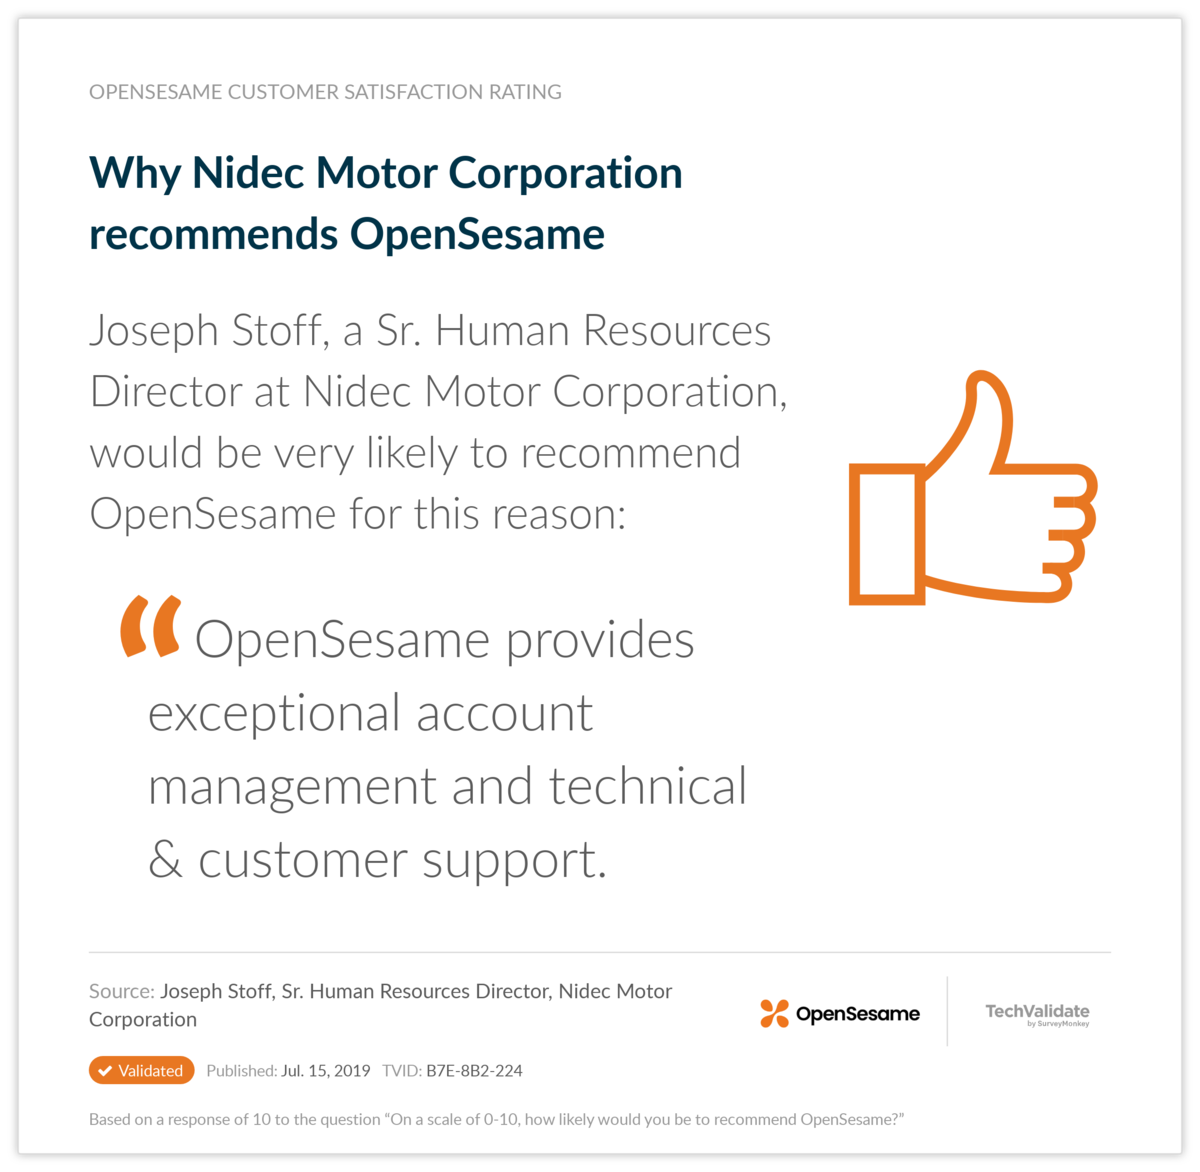 Why Nidec Motor Corporation recommends OpenSesame